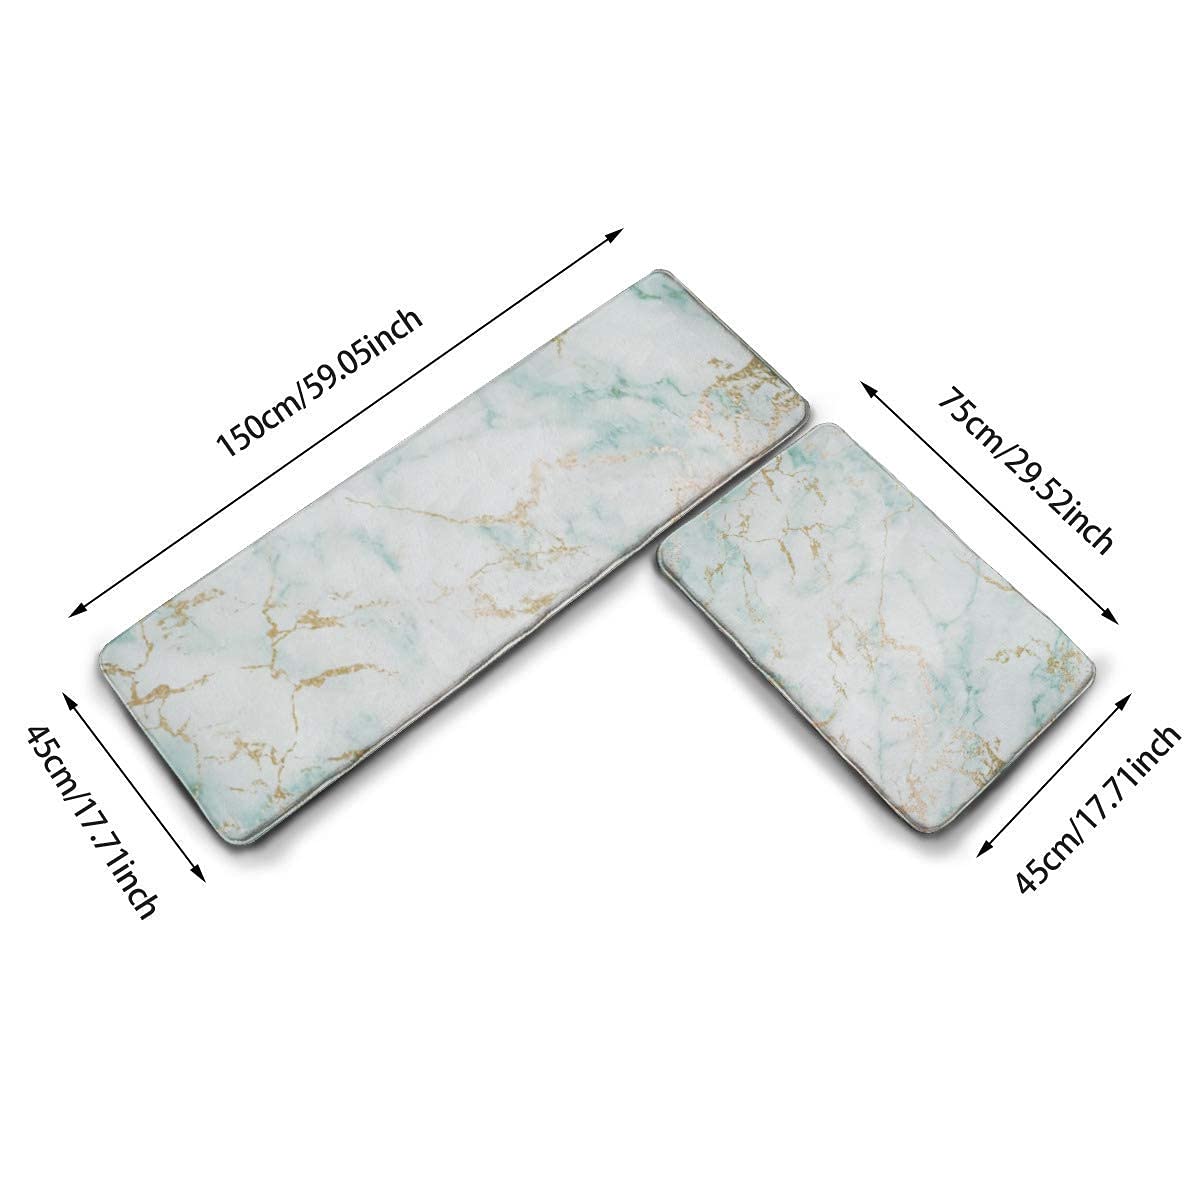 Mouthdodo 2 Pcs Kitchen Rug Set, White Mint Green Marble Gold Gray Glam Non-Slip Kitchen Mats and Rugs Soft Flannel Non-Slip Area Runner Rugs Washable Durable Doormat Carpet, OneSize